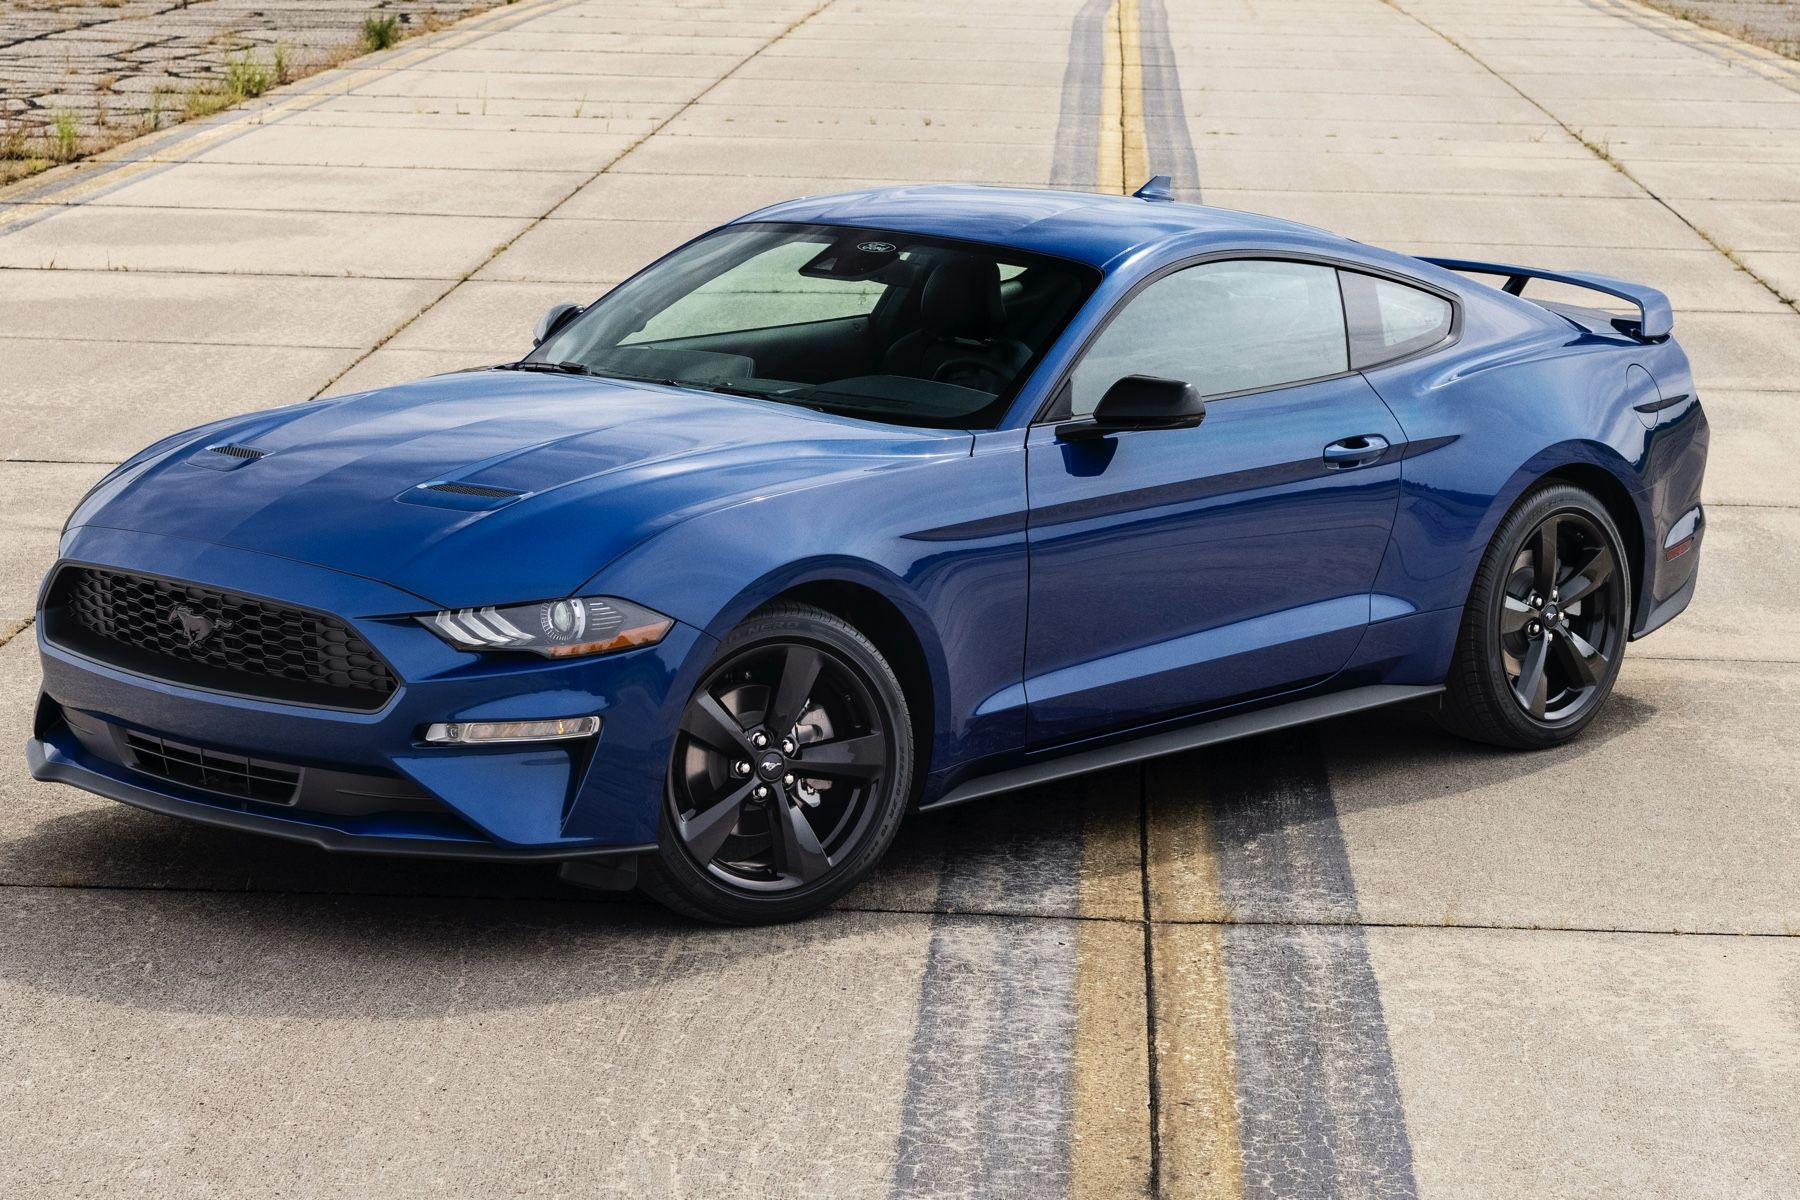 Ford's 2022 Mustang adds Stealth option, GT trim may lose power